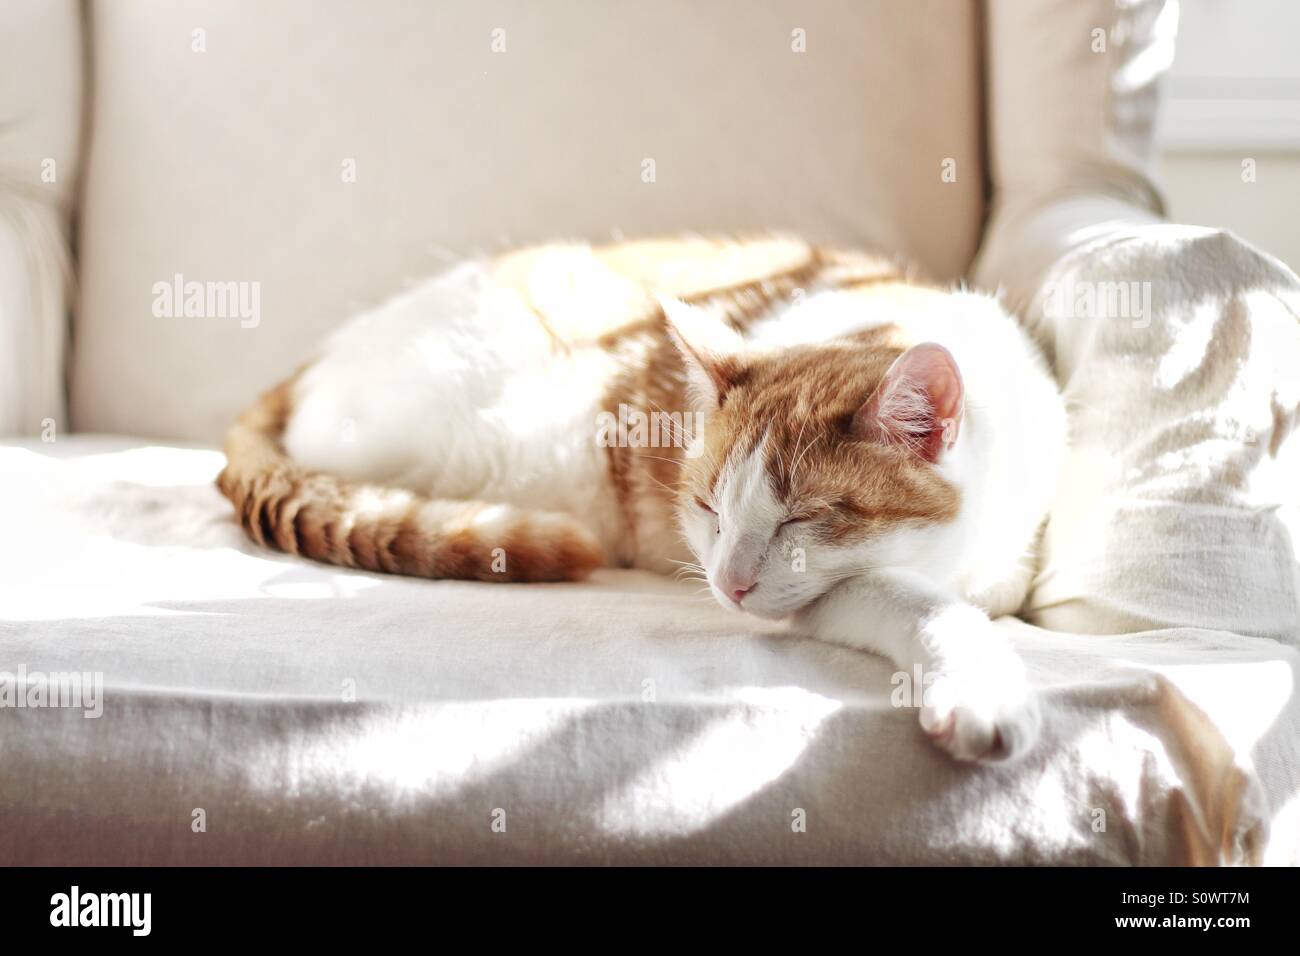 Tabby cat napping in sunshine Stock Photo